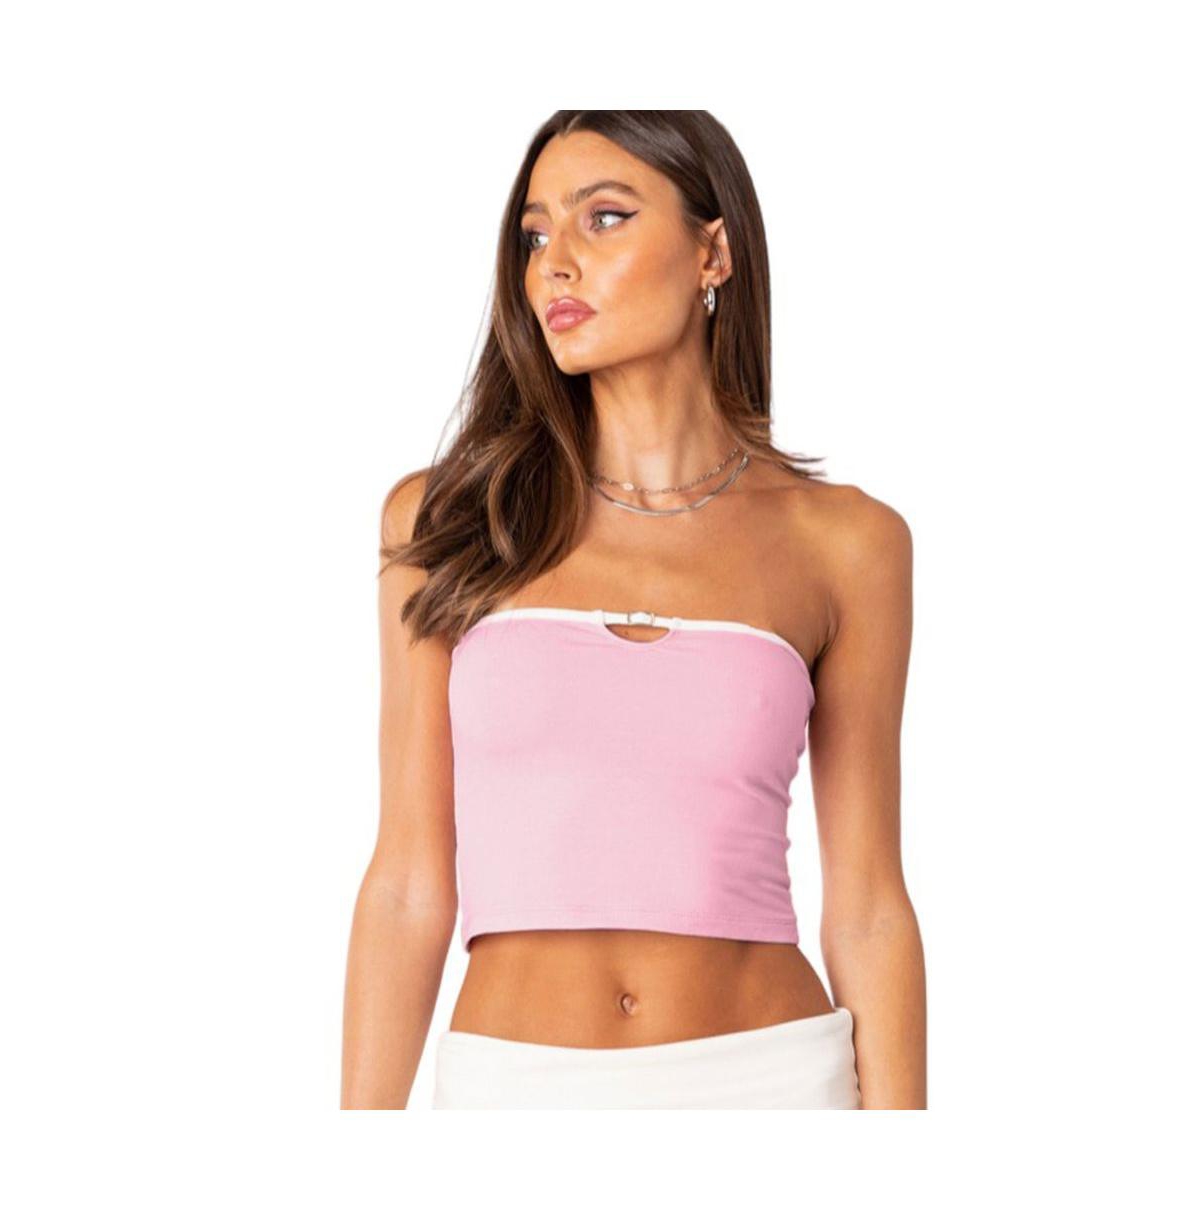 Women's Strapless Crop Top With Small Belt On Bust - Light pink